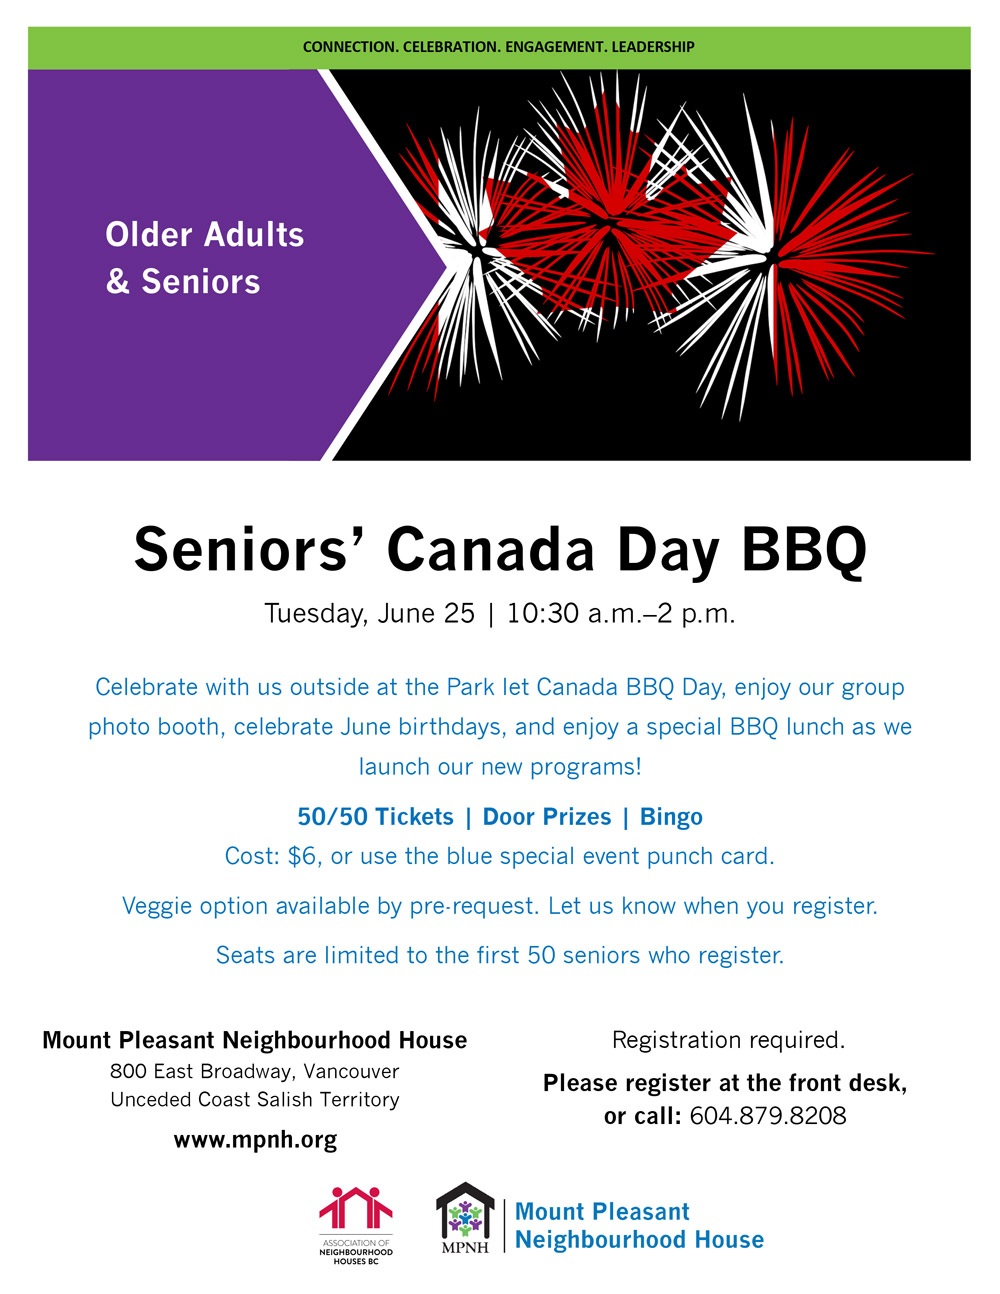 An image of the poster with event details, featuring a graphic of a fireworks display with the colours of the Canadian flag, on a black background.